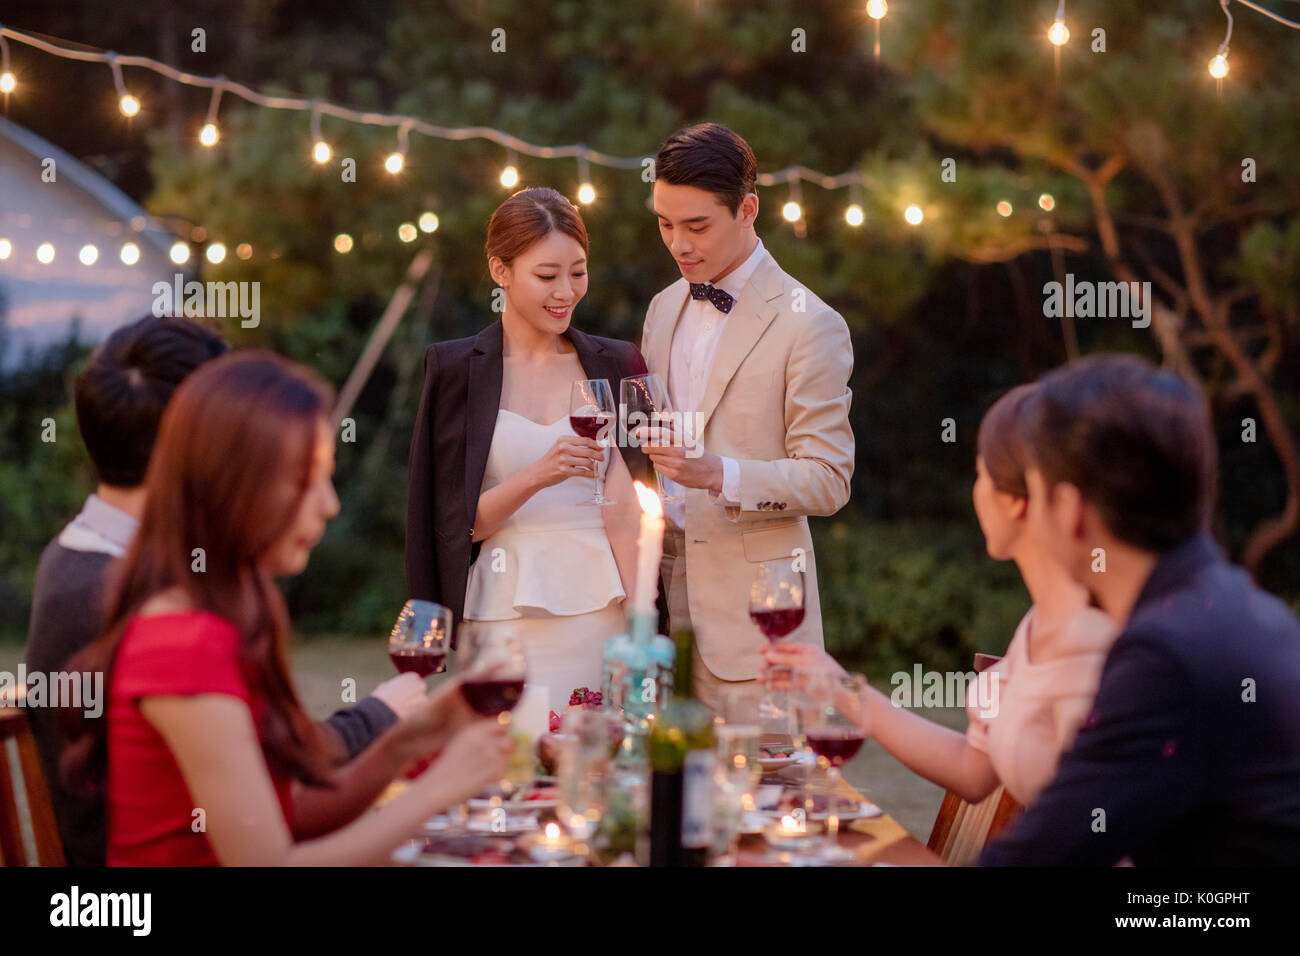 Smiling couple with wine glasses posing and their friends enjoying a party outdoors in the evening Stock Photo